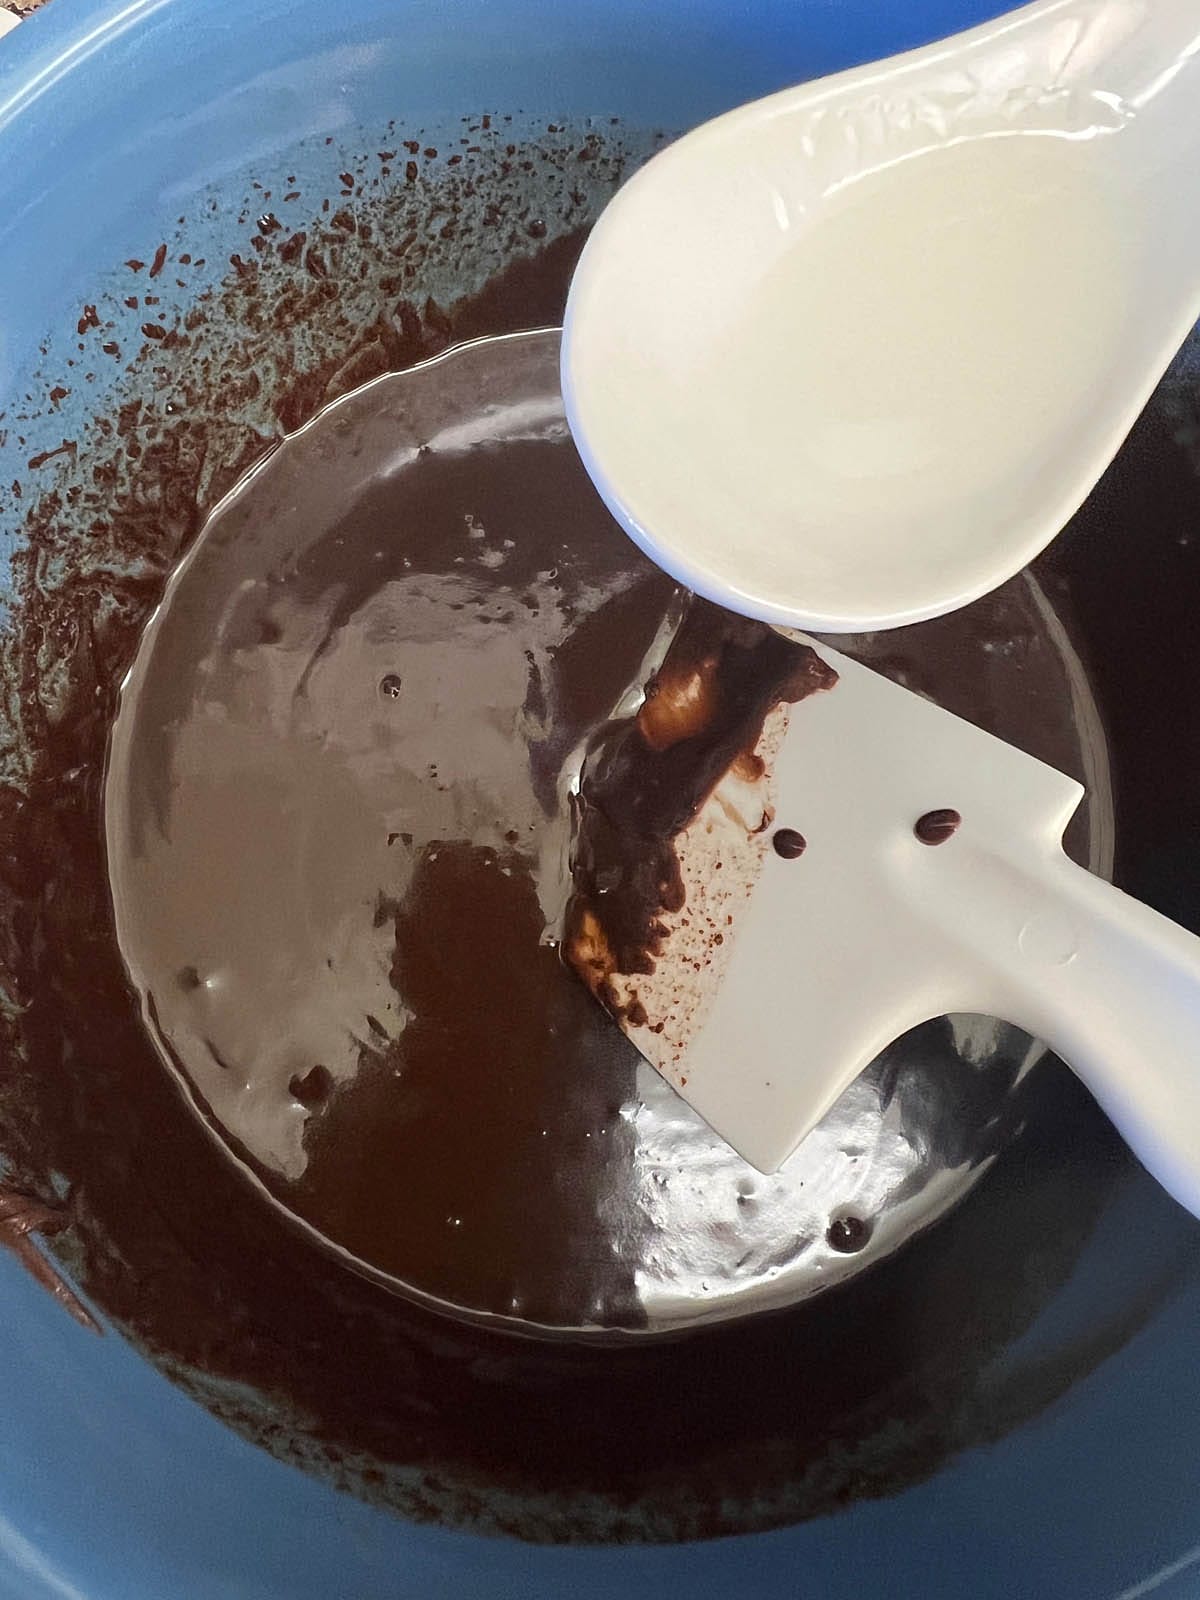 Peppermint extract being added to chocolate mixture.